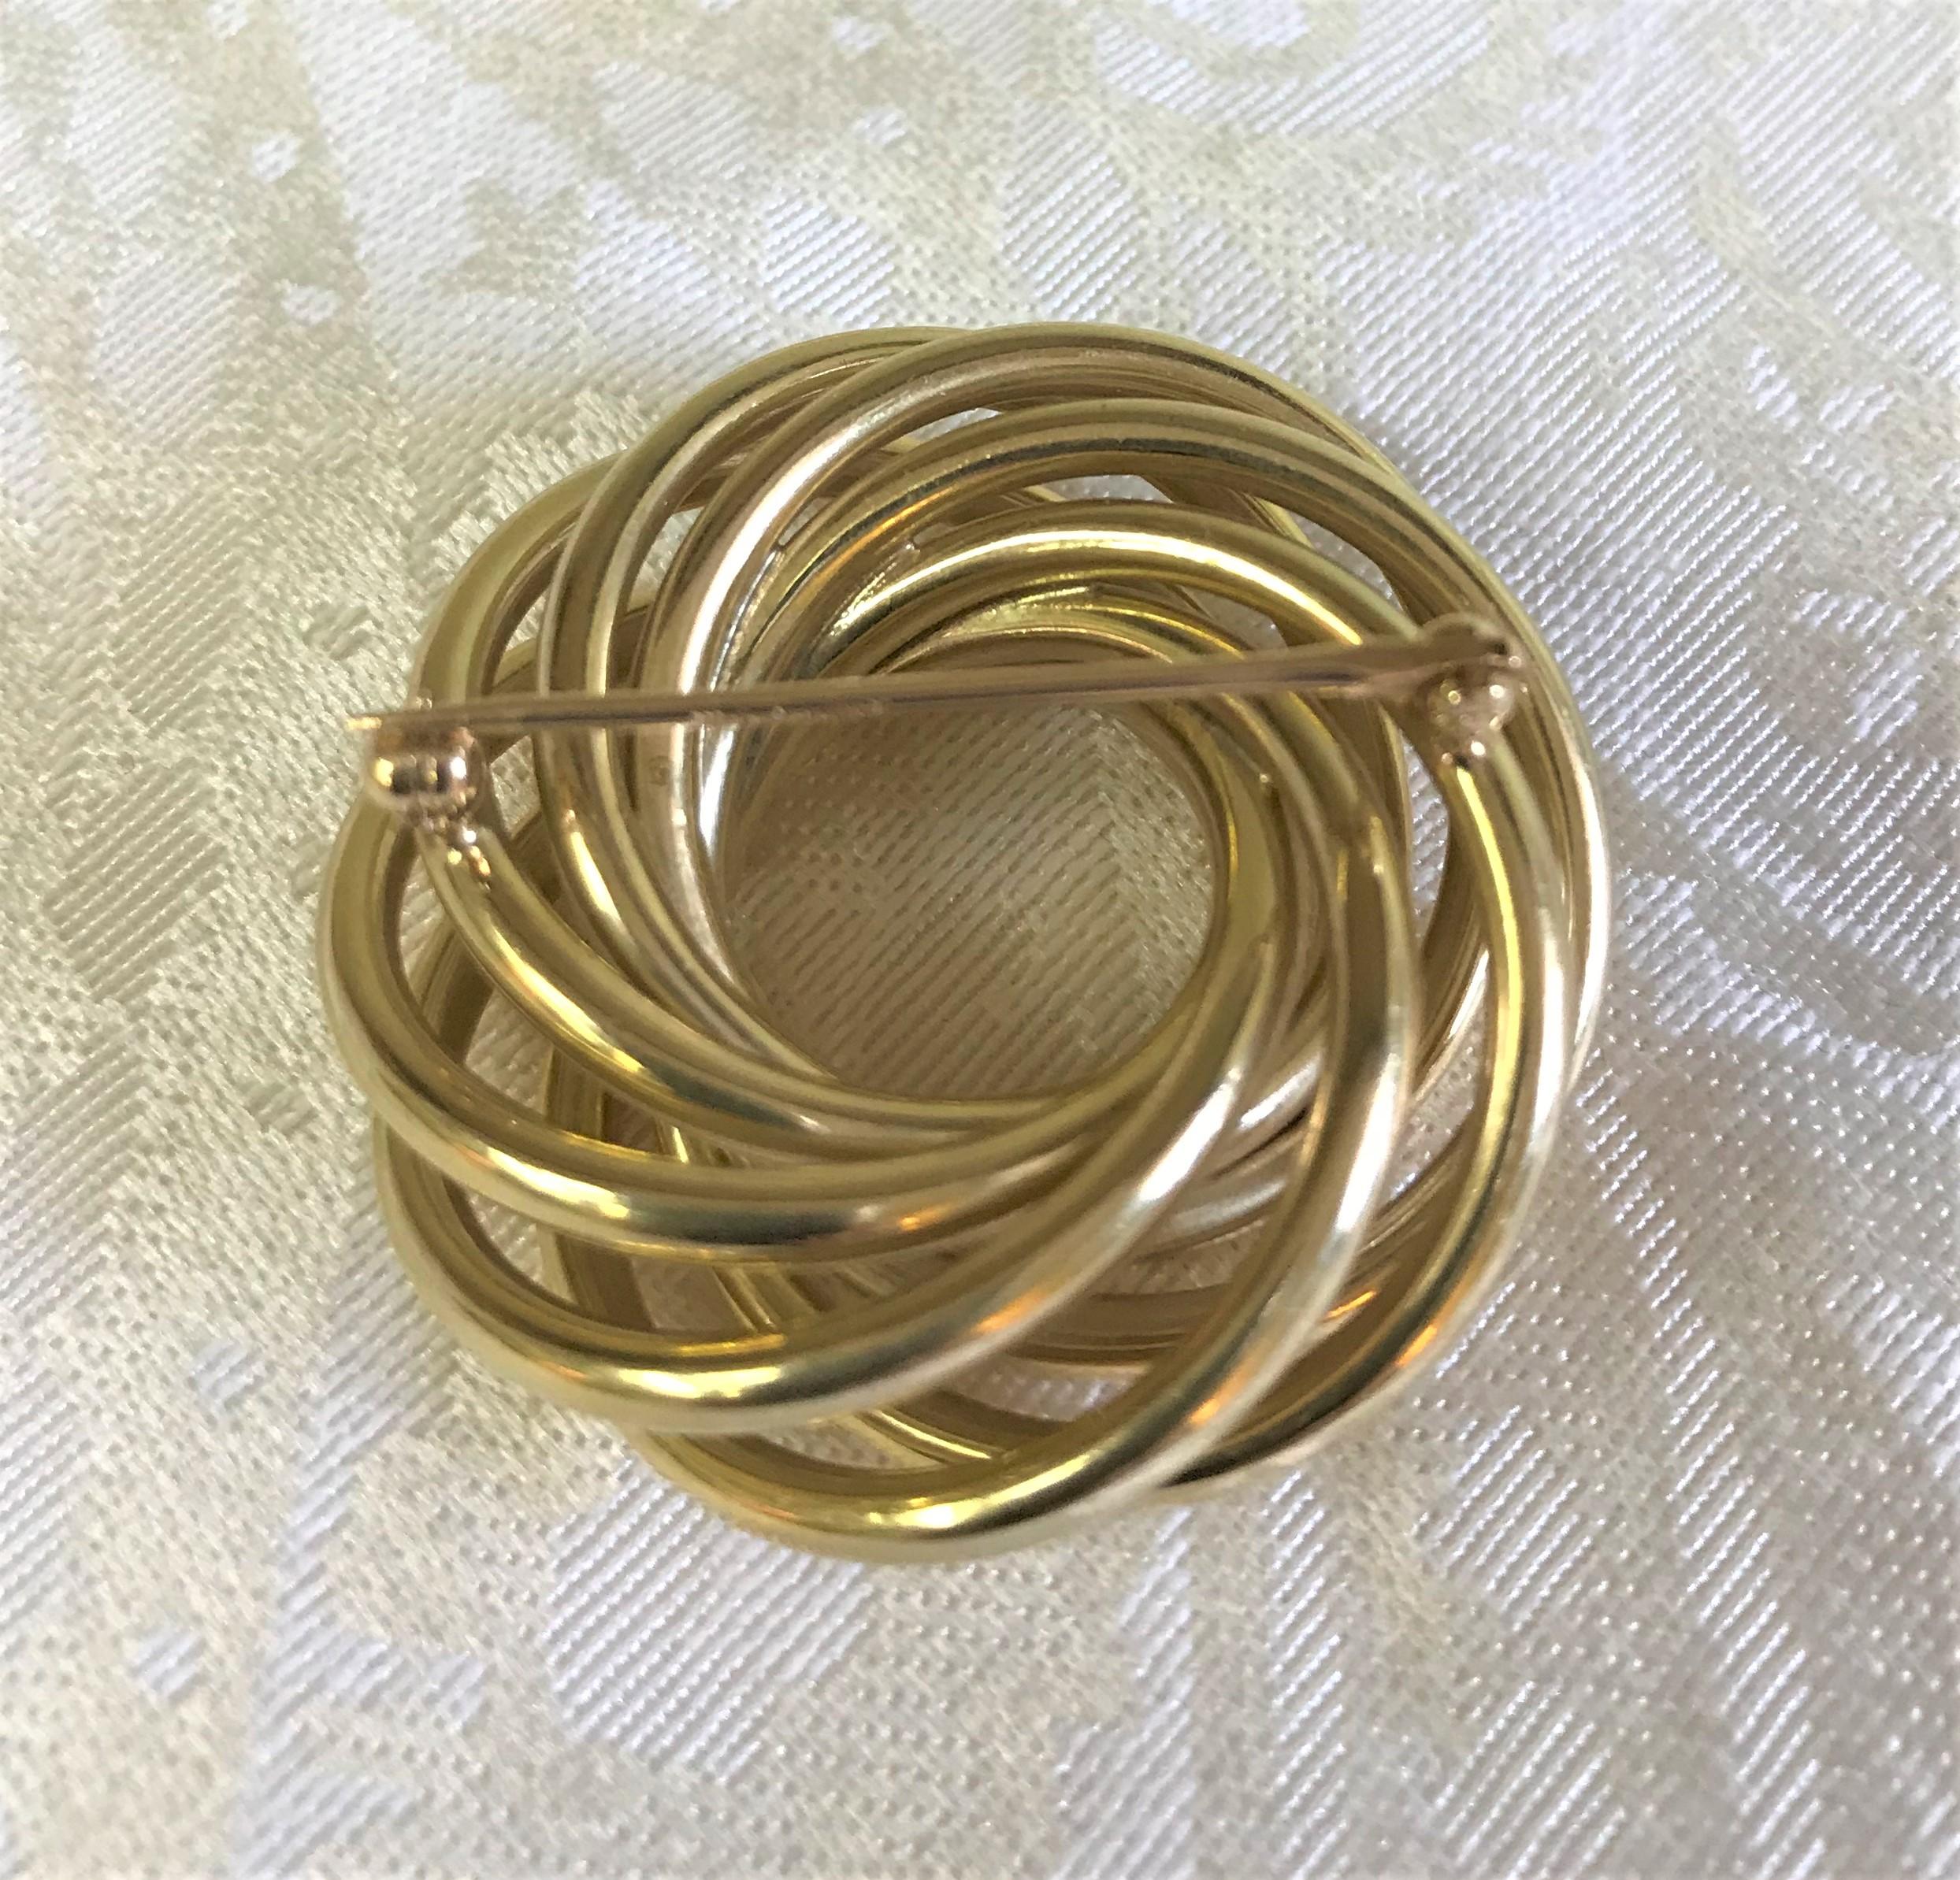 This circular knot brooch is guaranteed  to draw attention to your outfit!
Classic style
14 karat yellow gold 
Approximately 1.5 inches in diameter
Stamped 